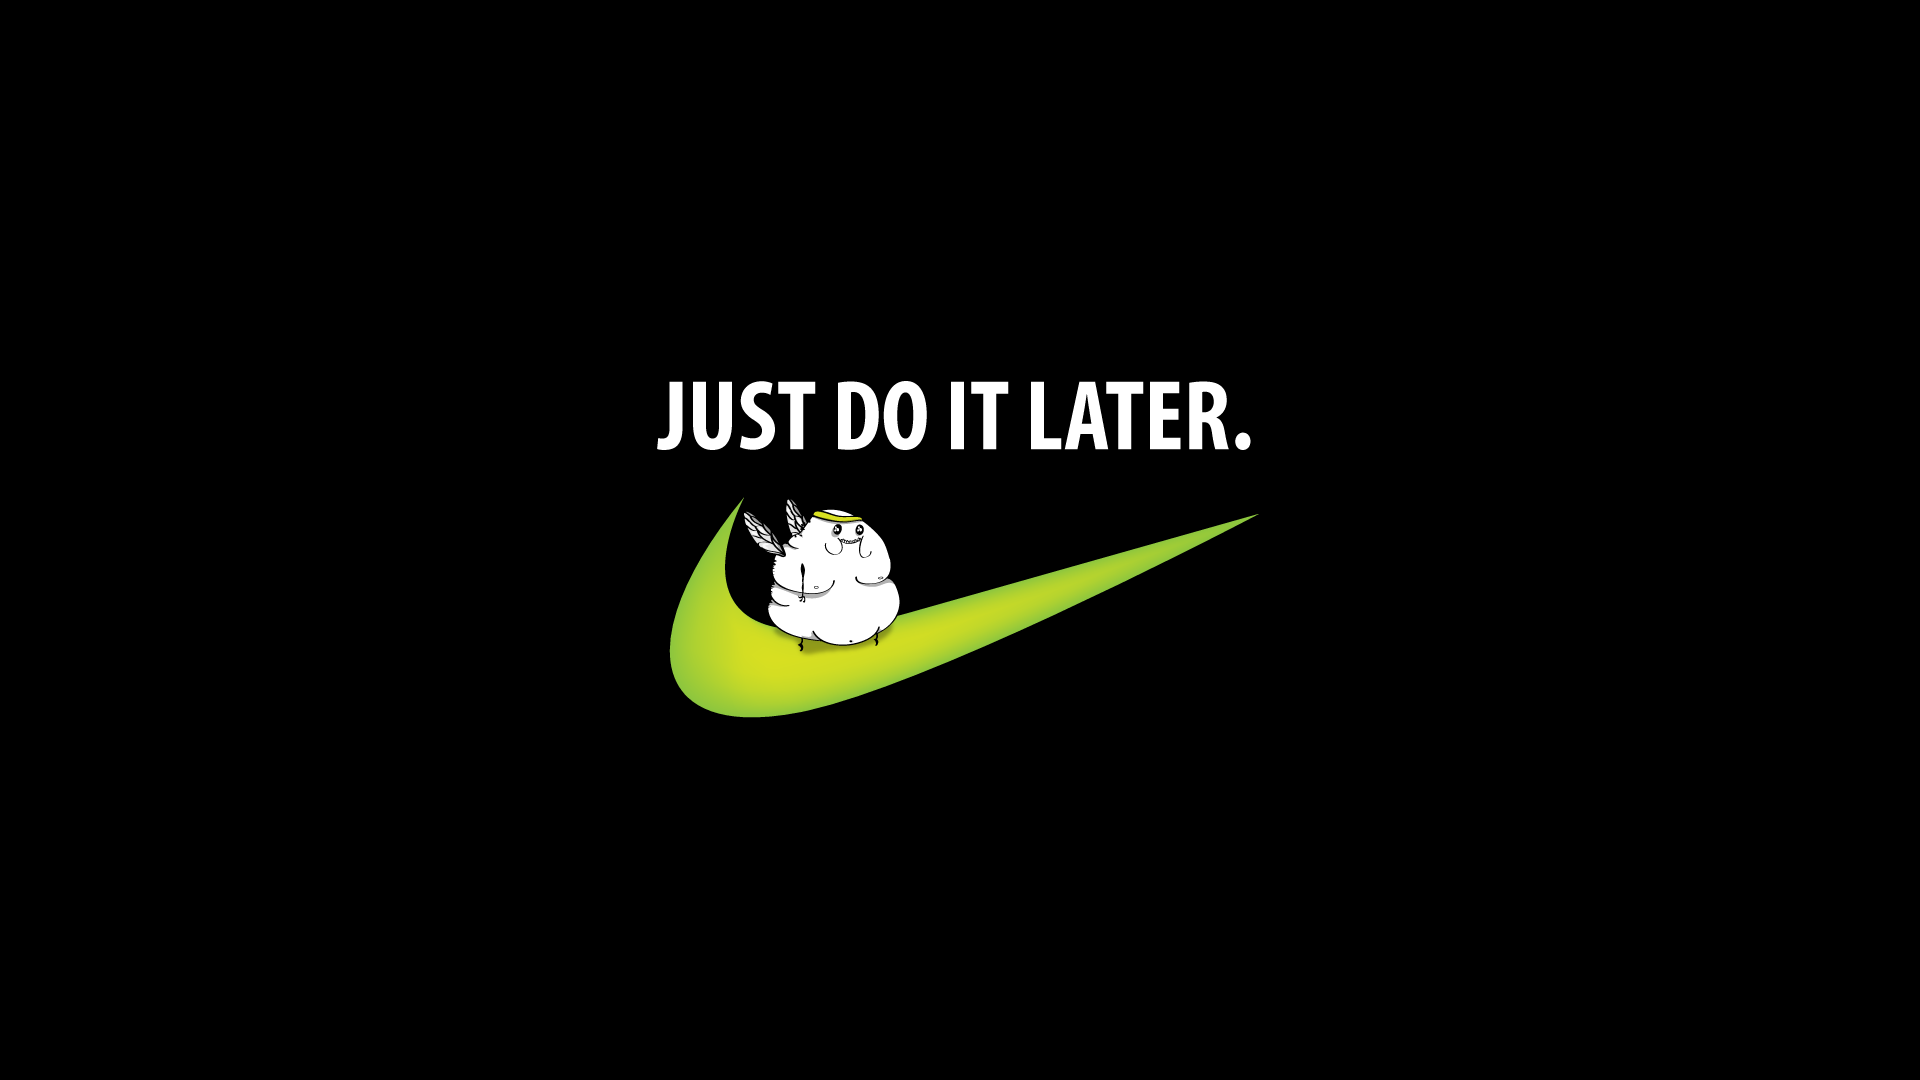 Nike Motivational Quotes Wallpaper Just do it later wallpaper